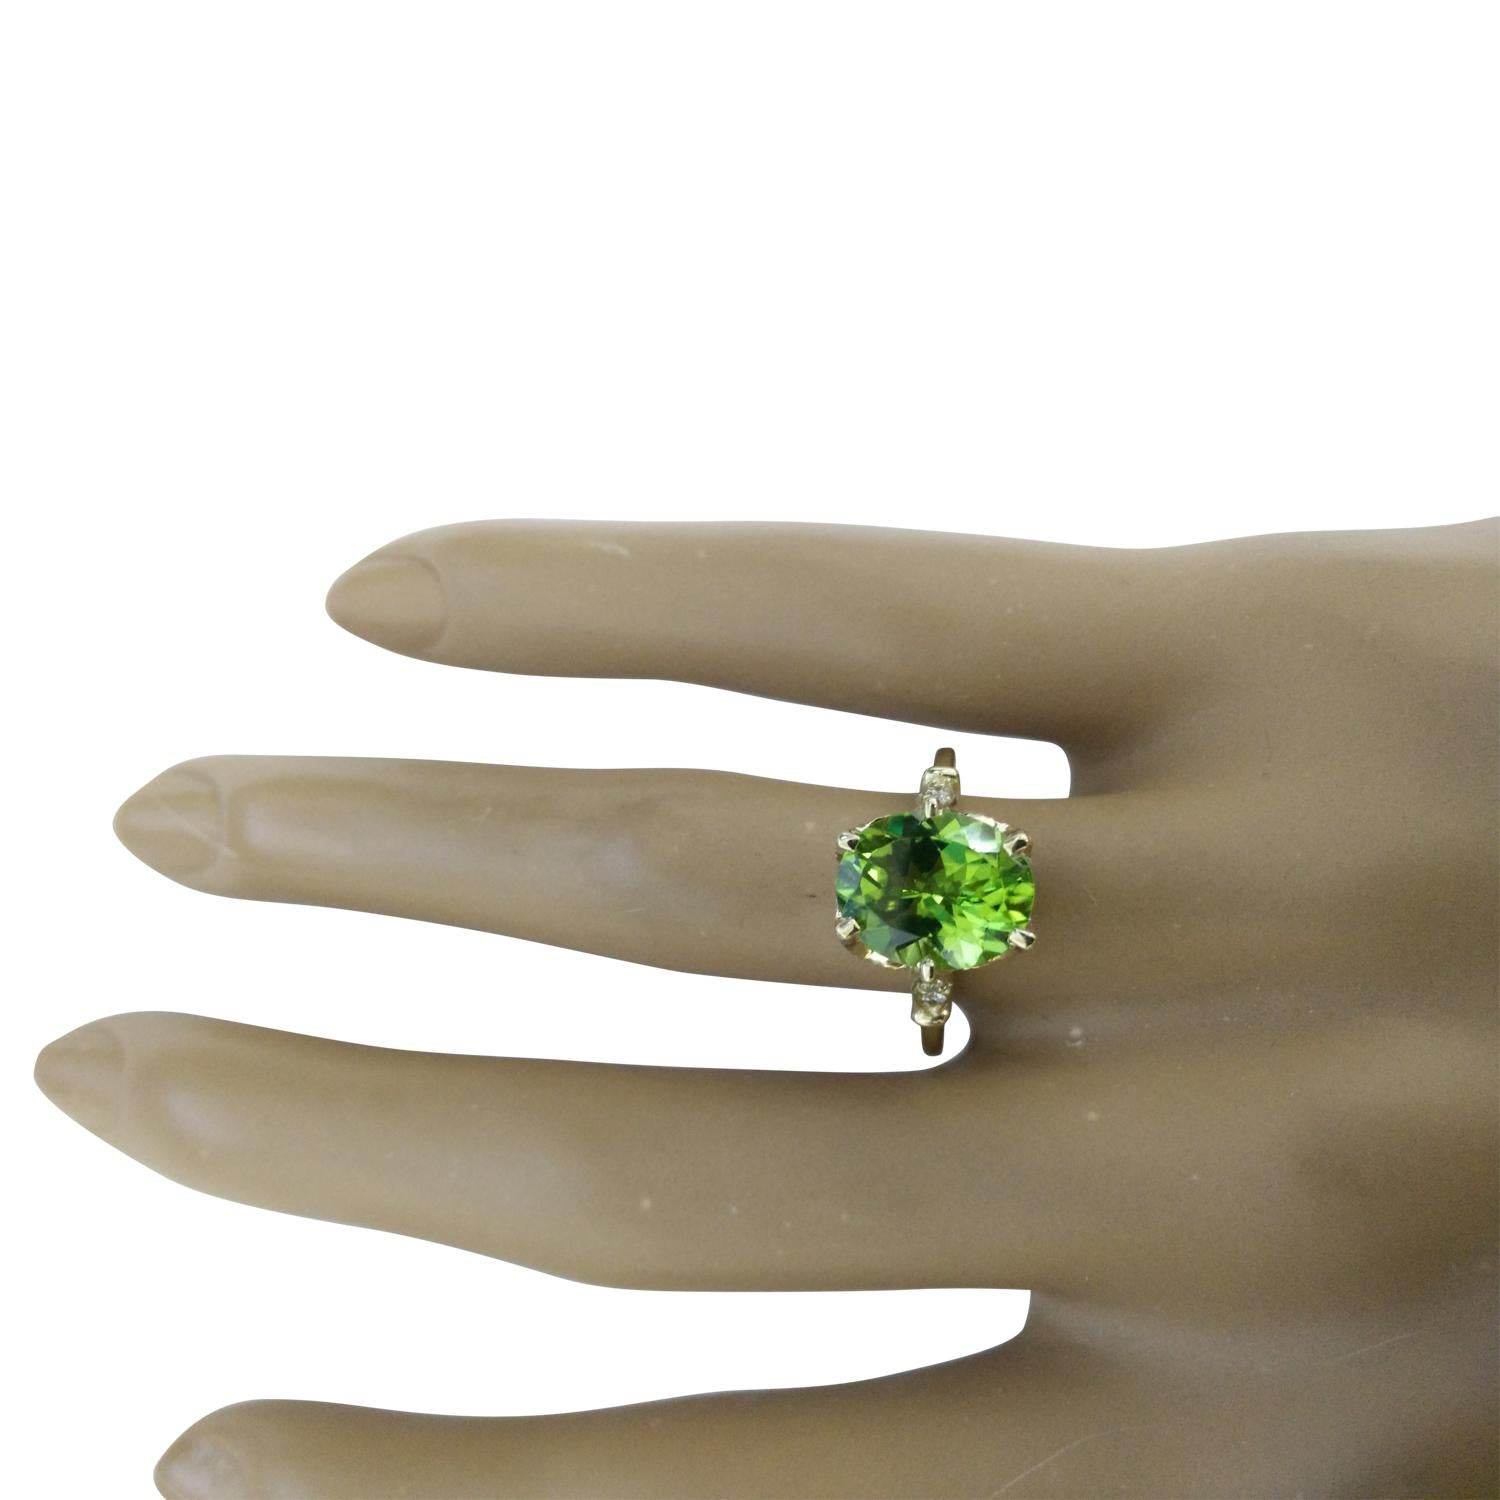 3.41 Carat Natural Peridot 14 Karat Solid Yellow Gold Diamond Ring
Stamped: 14K
Total Ring Weight: 4.2 Grams 
Peridot Weight: 3.26 Carat (11.00x9.00 Millimeters)  
Diamond Weight: 0.15 Carat (F-G Color, VS2-SI1 Clarity)
Quantity: 4
Face Measures: